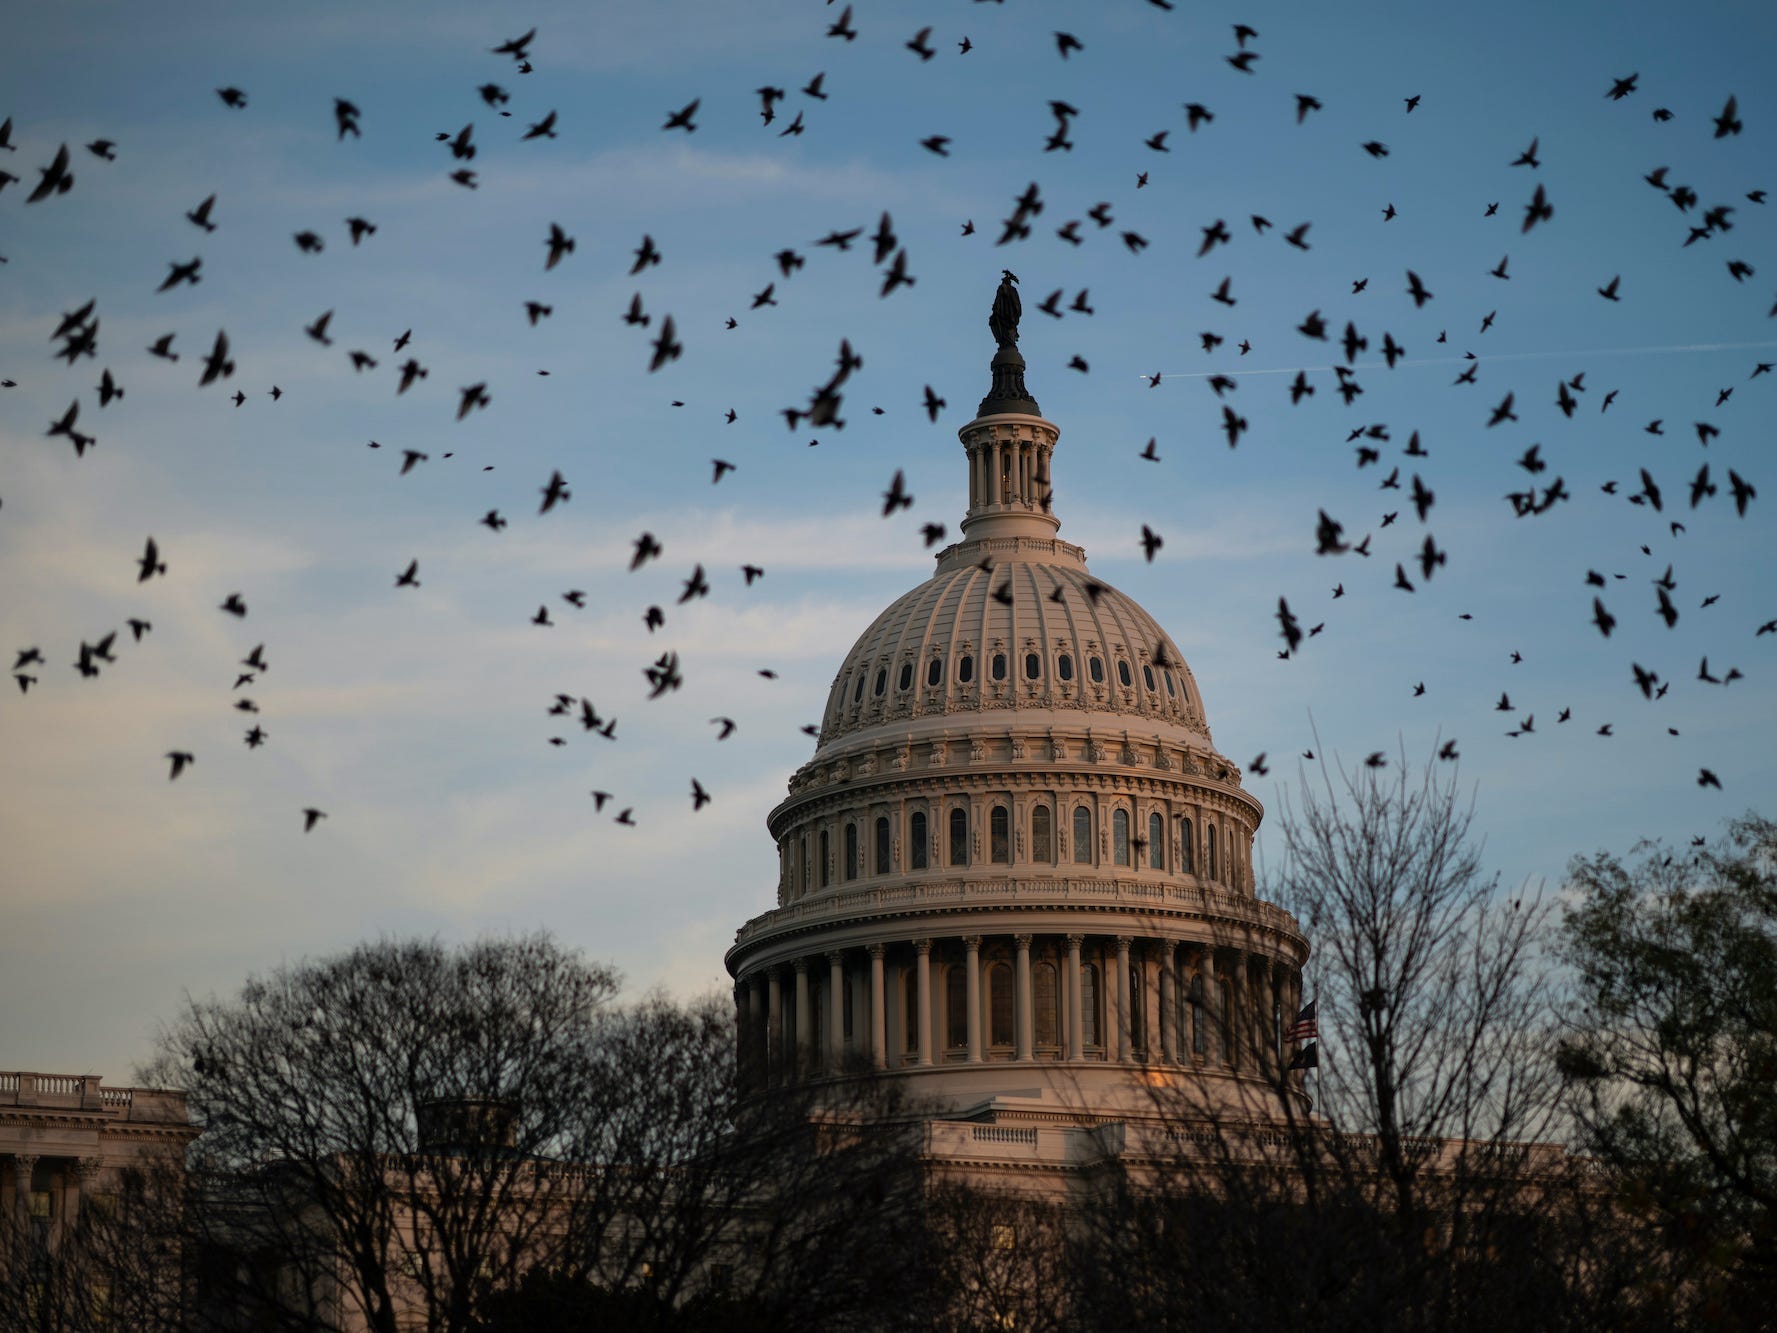 A flock of birds flies near the U.S. Capitol at dusk on December 2, 2021 in Washington, DC. With a deadline at midnight on Friday, Congressional leaders are working to pass a continuing resolution to fund the government and avoid a government shutdown.